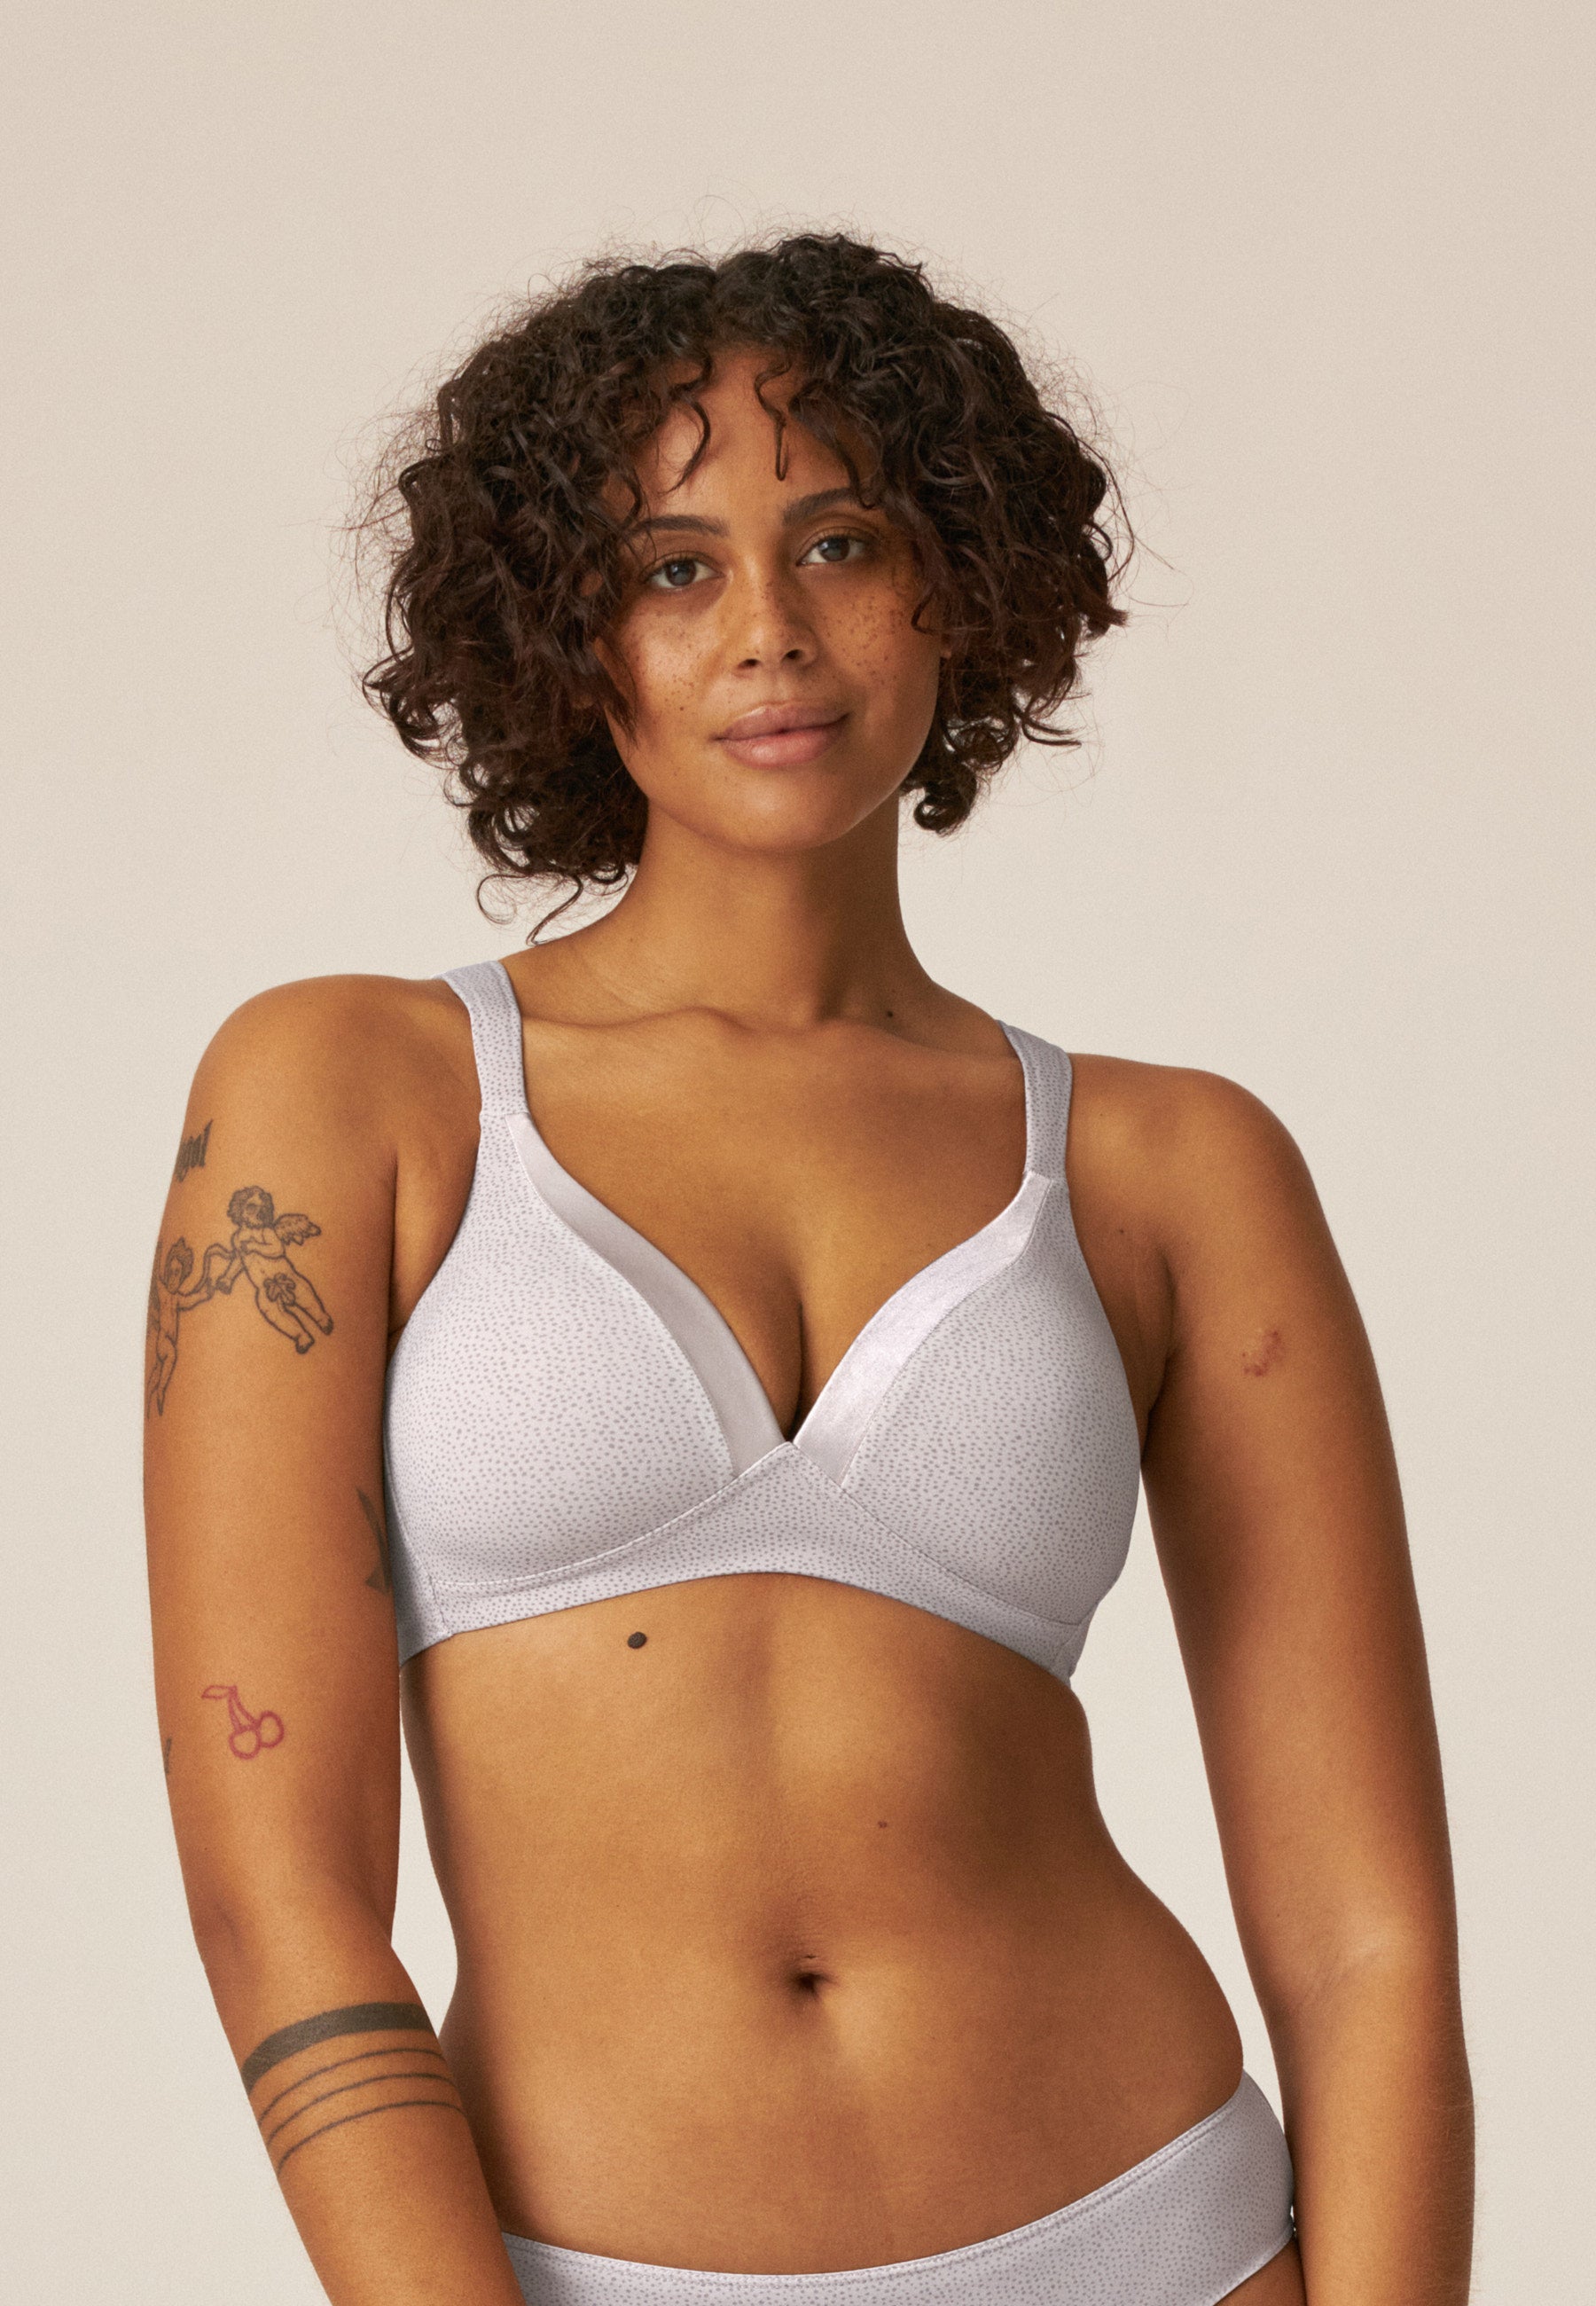 Dotted Soft Bra with Cup - Taupe/Grey